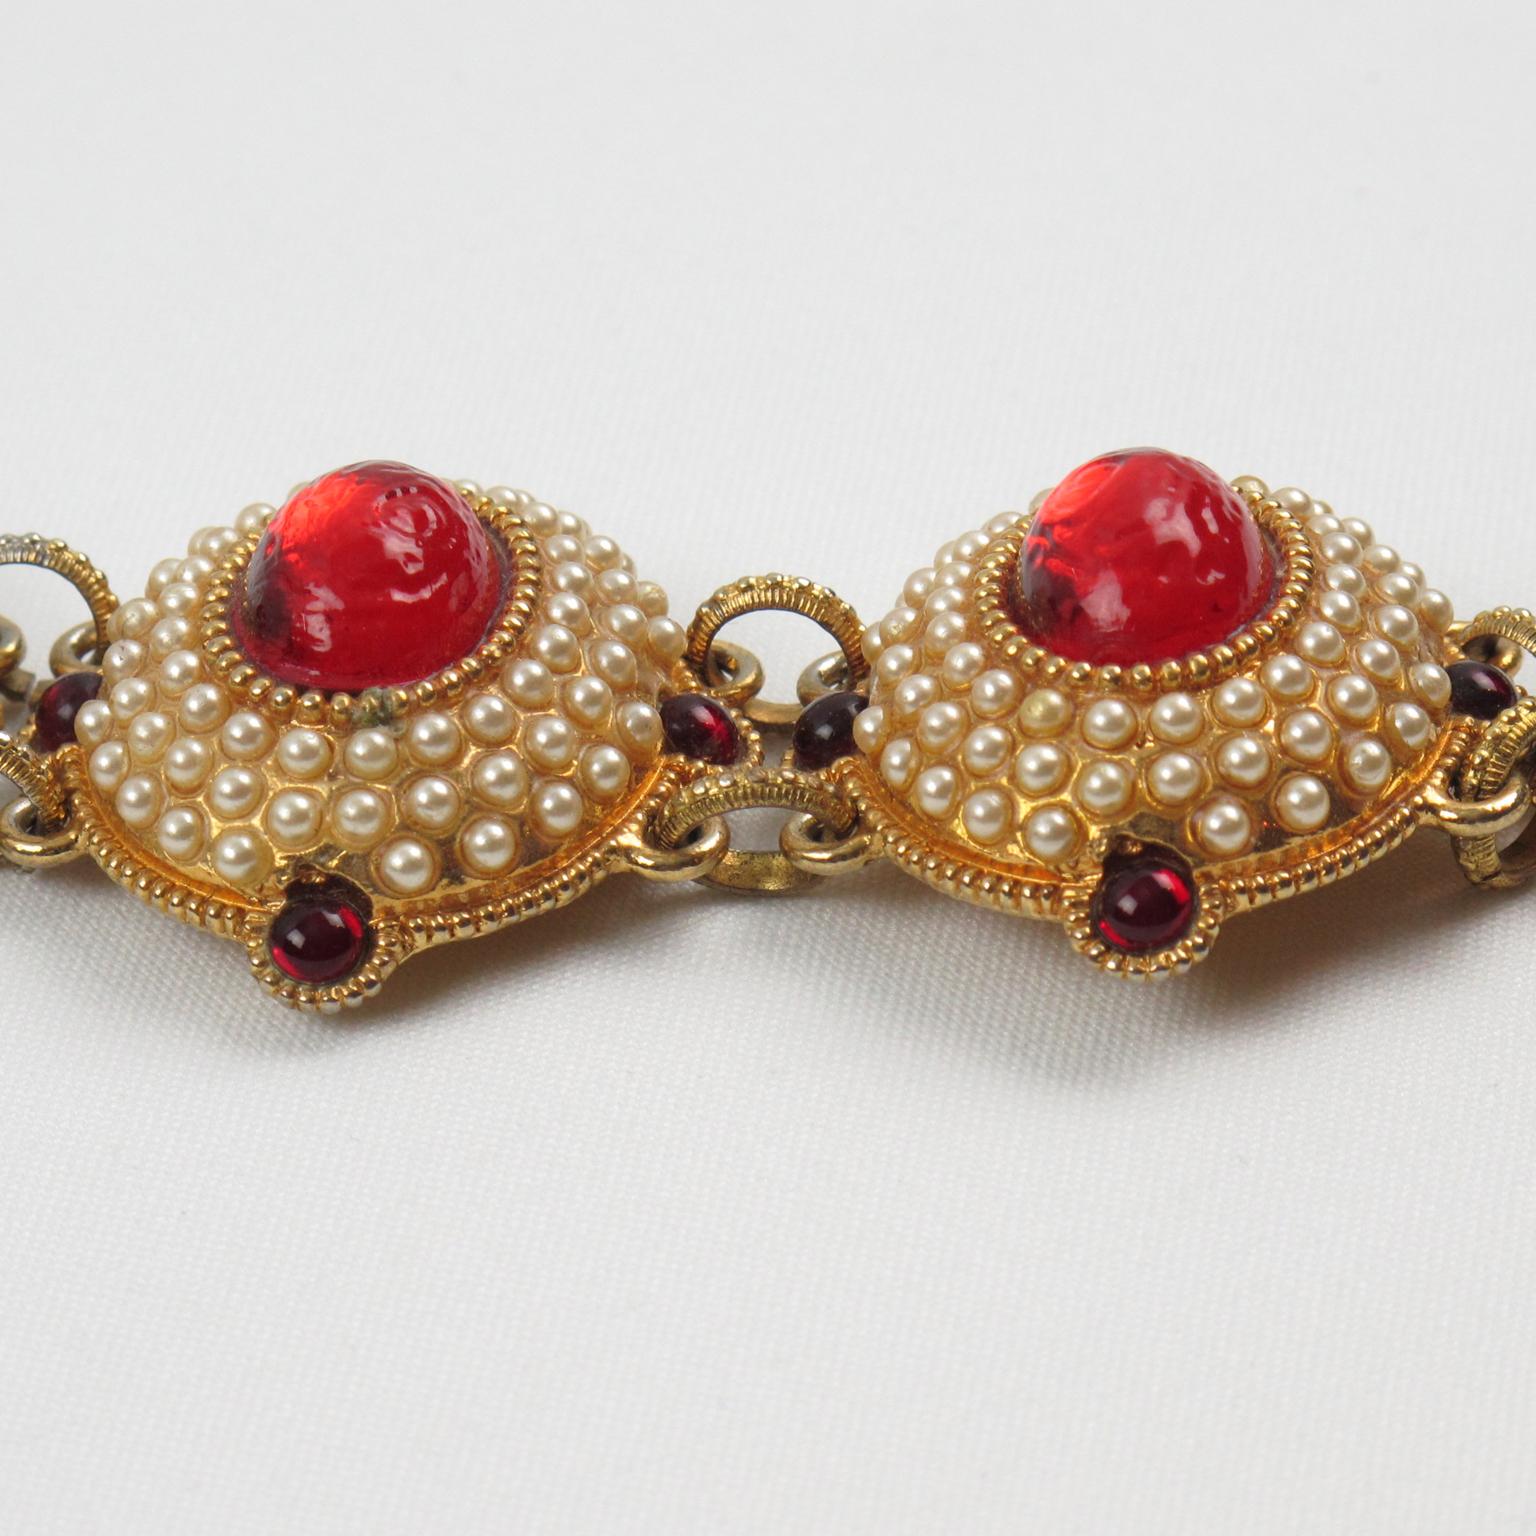 Modern Chantal Thomass Paris Jeweled Link Bracelet Pearl and Red Cabochons For Sale